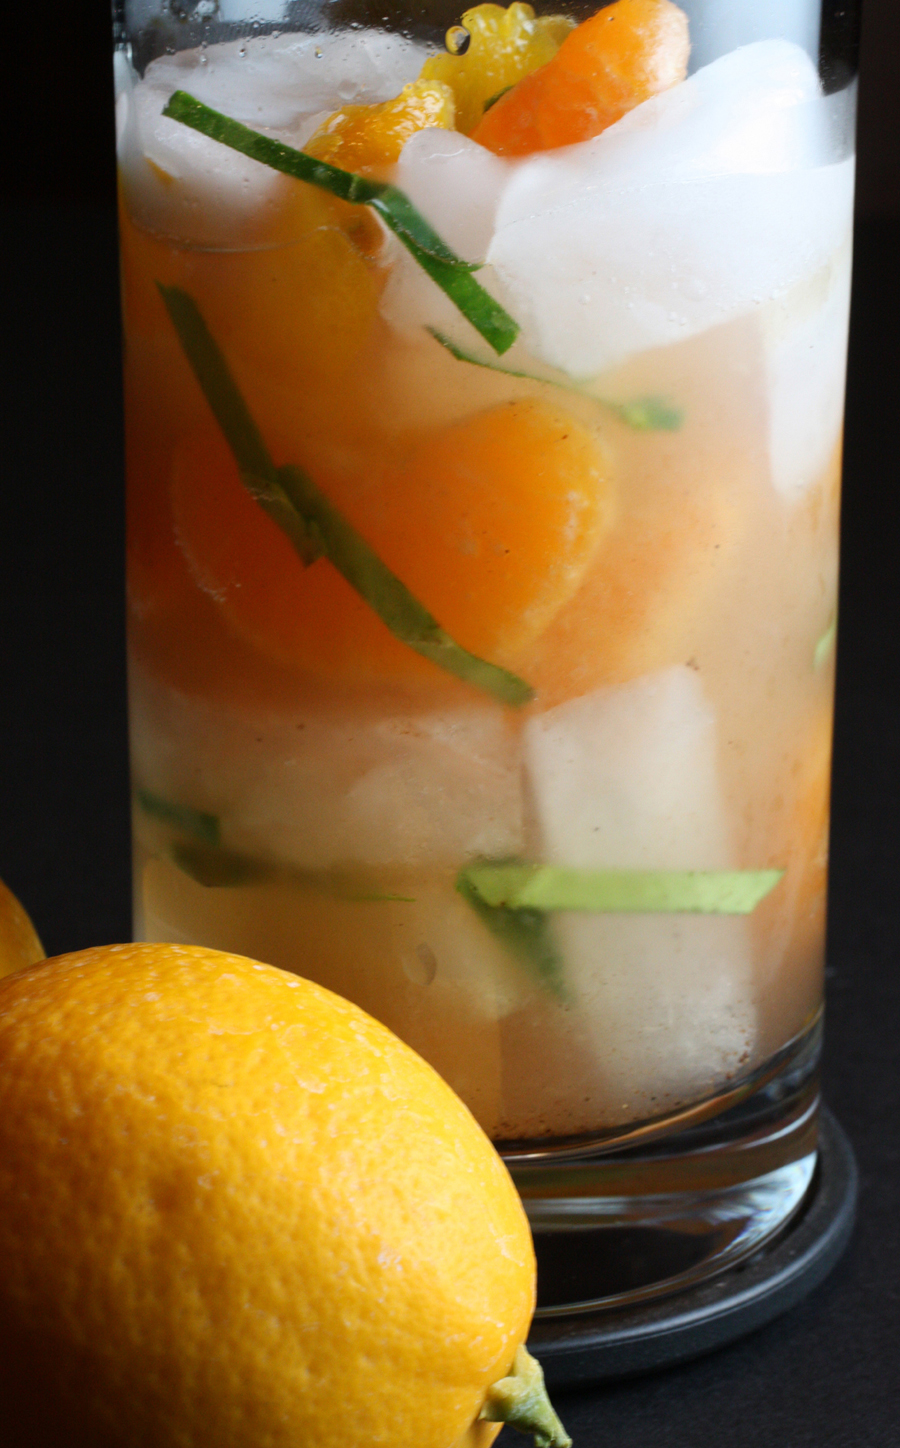 The citrus-infused Waverly Place Echo cocktail.